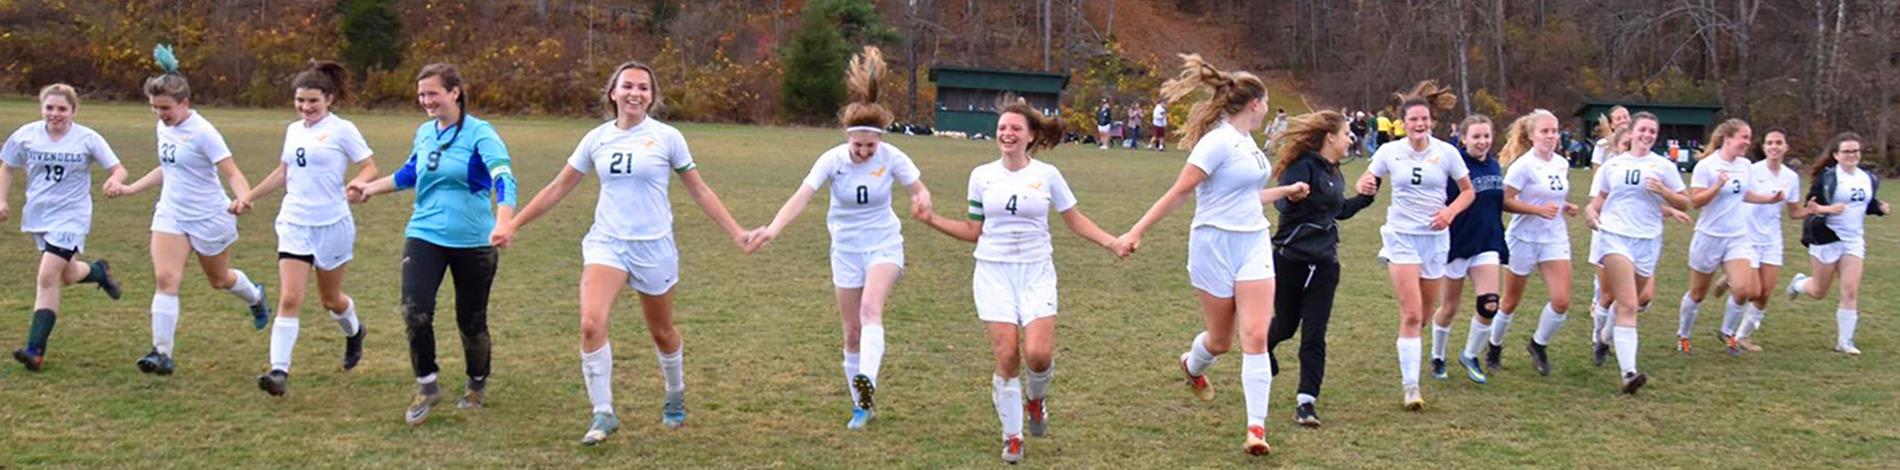 The girls soccer team holds hands and runs across the field